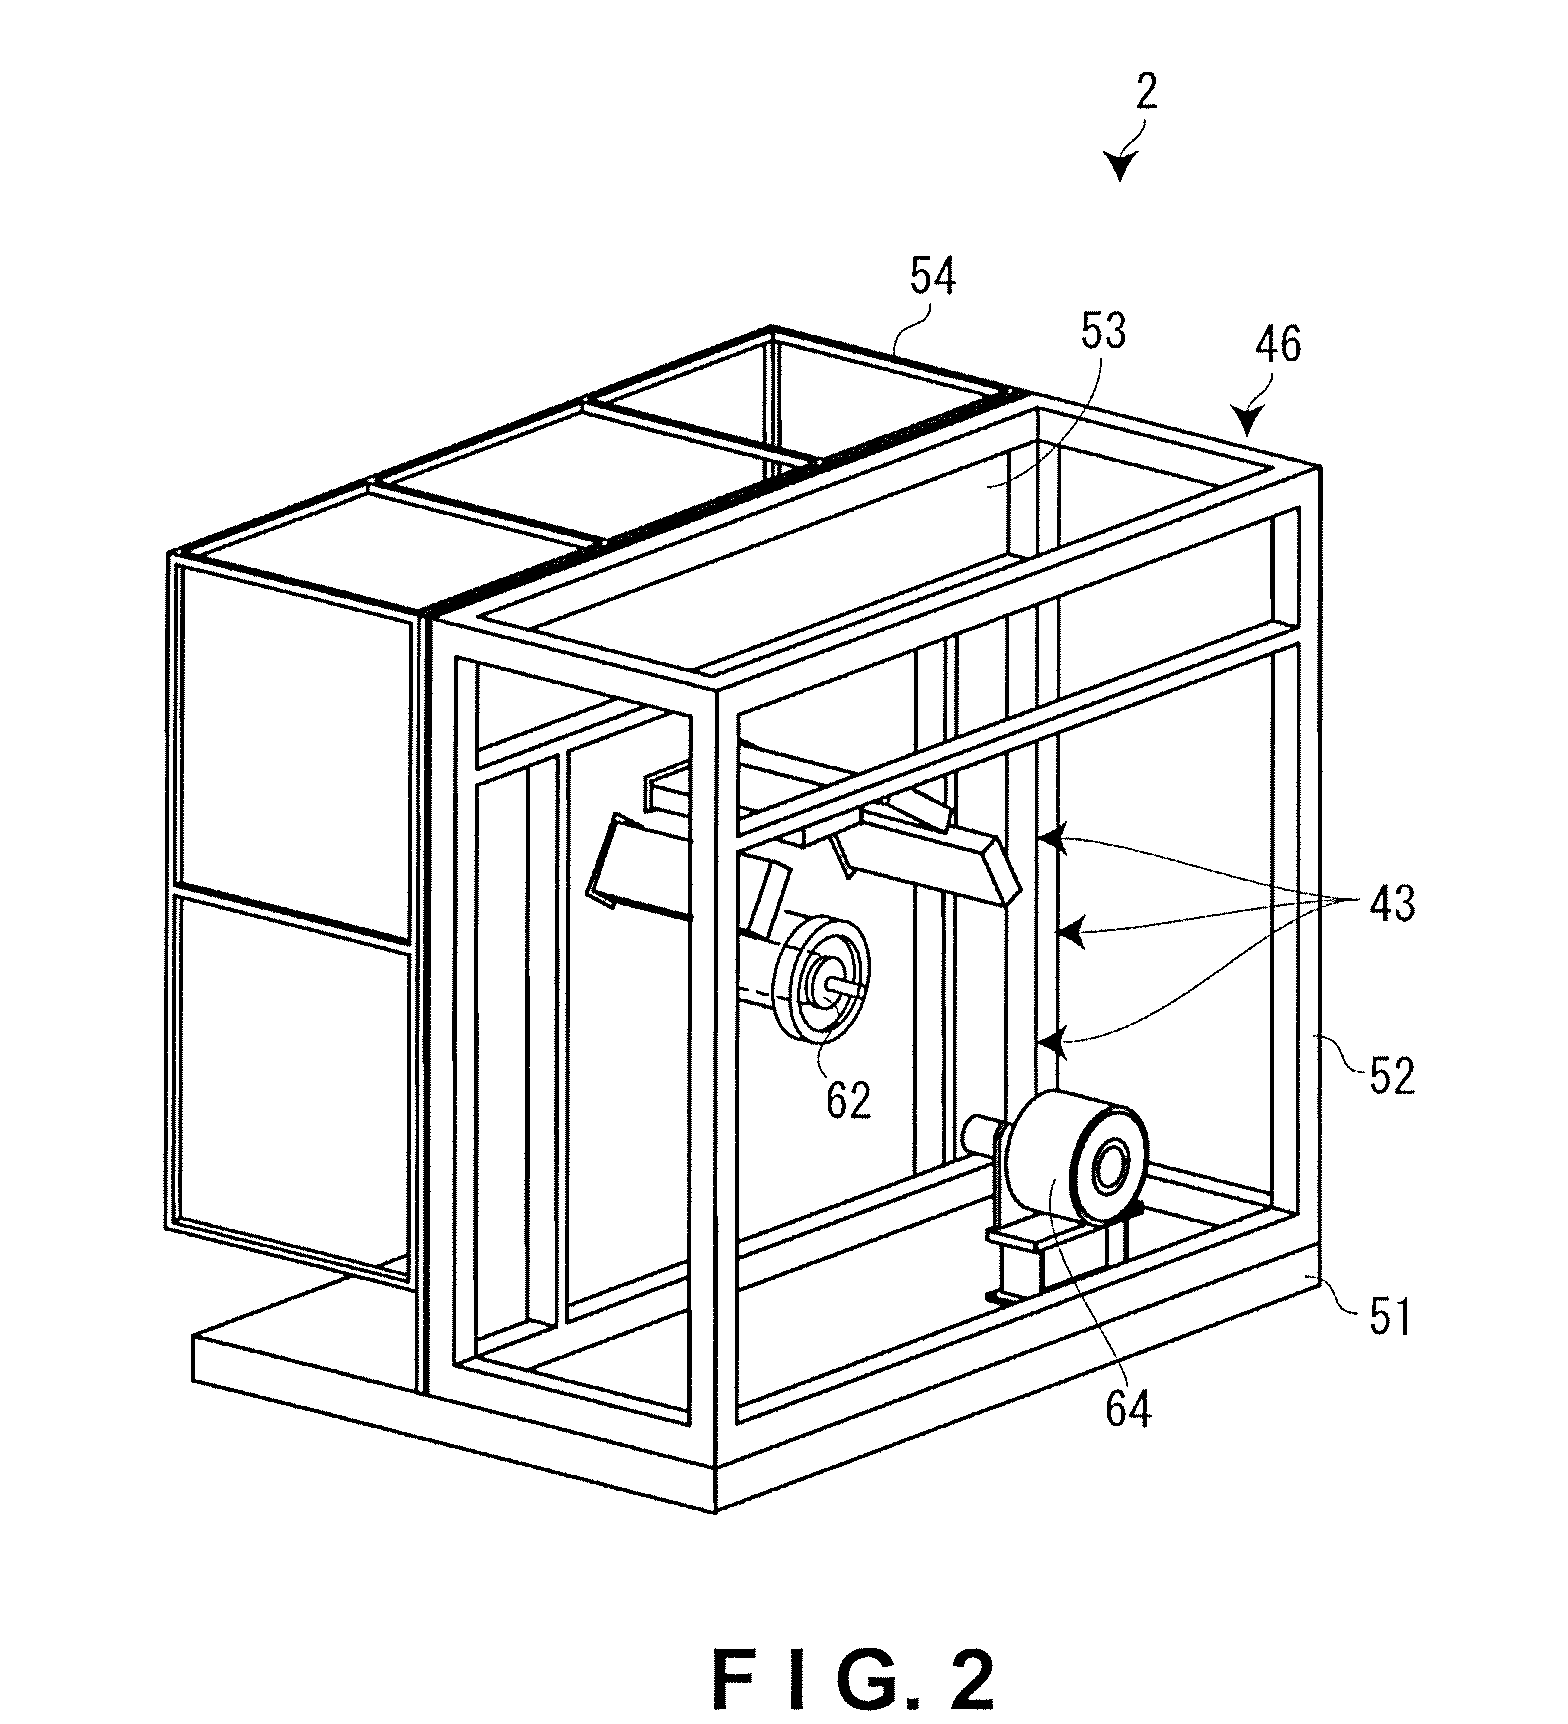 Carriage device and inkjet device